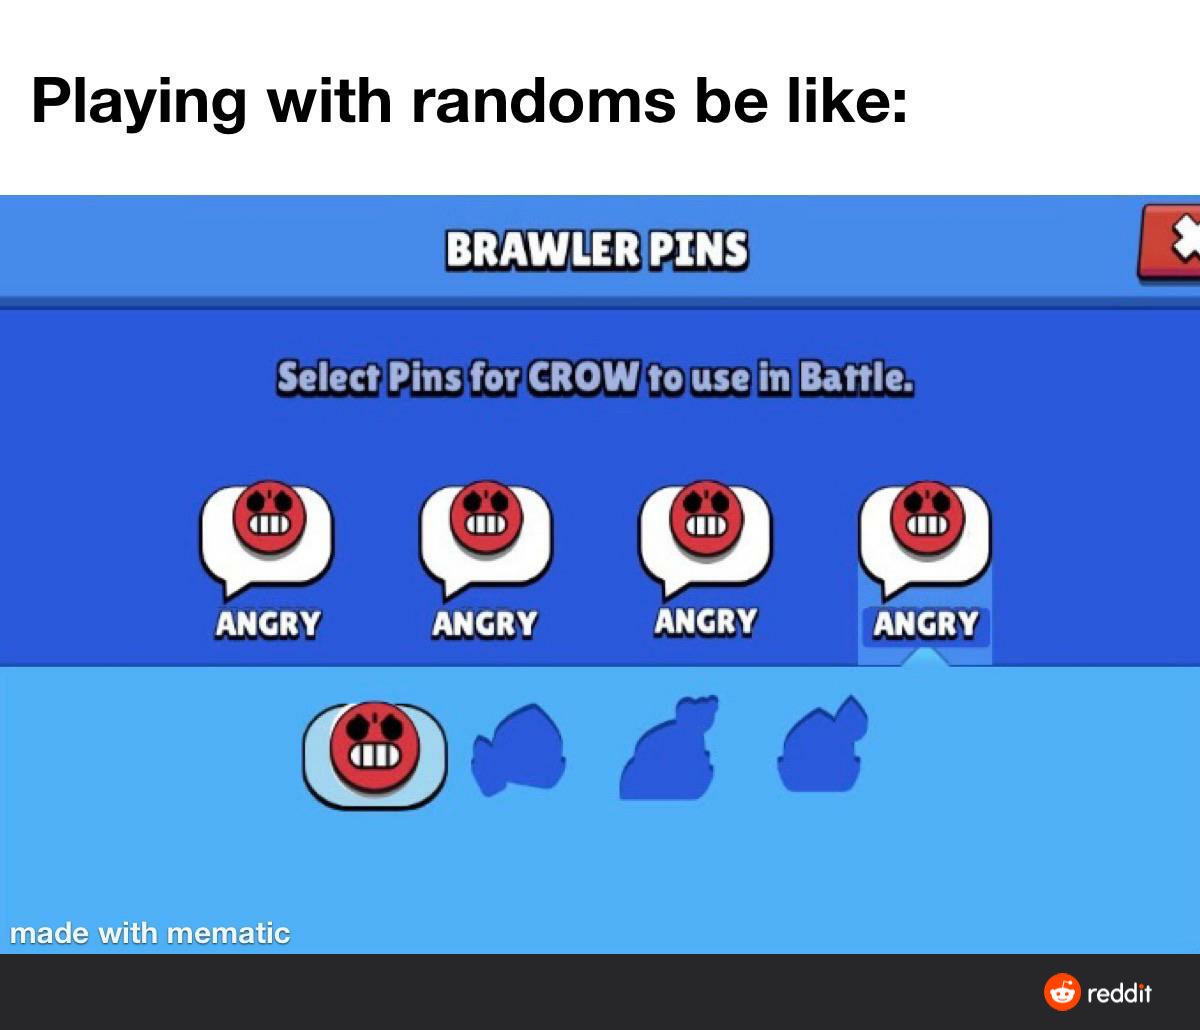 Kairostime Gaming On Twitter The Truth Lol Credit Https T Co 0vgesso4rs - brawl stars angry pin